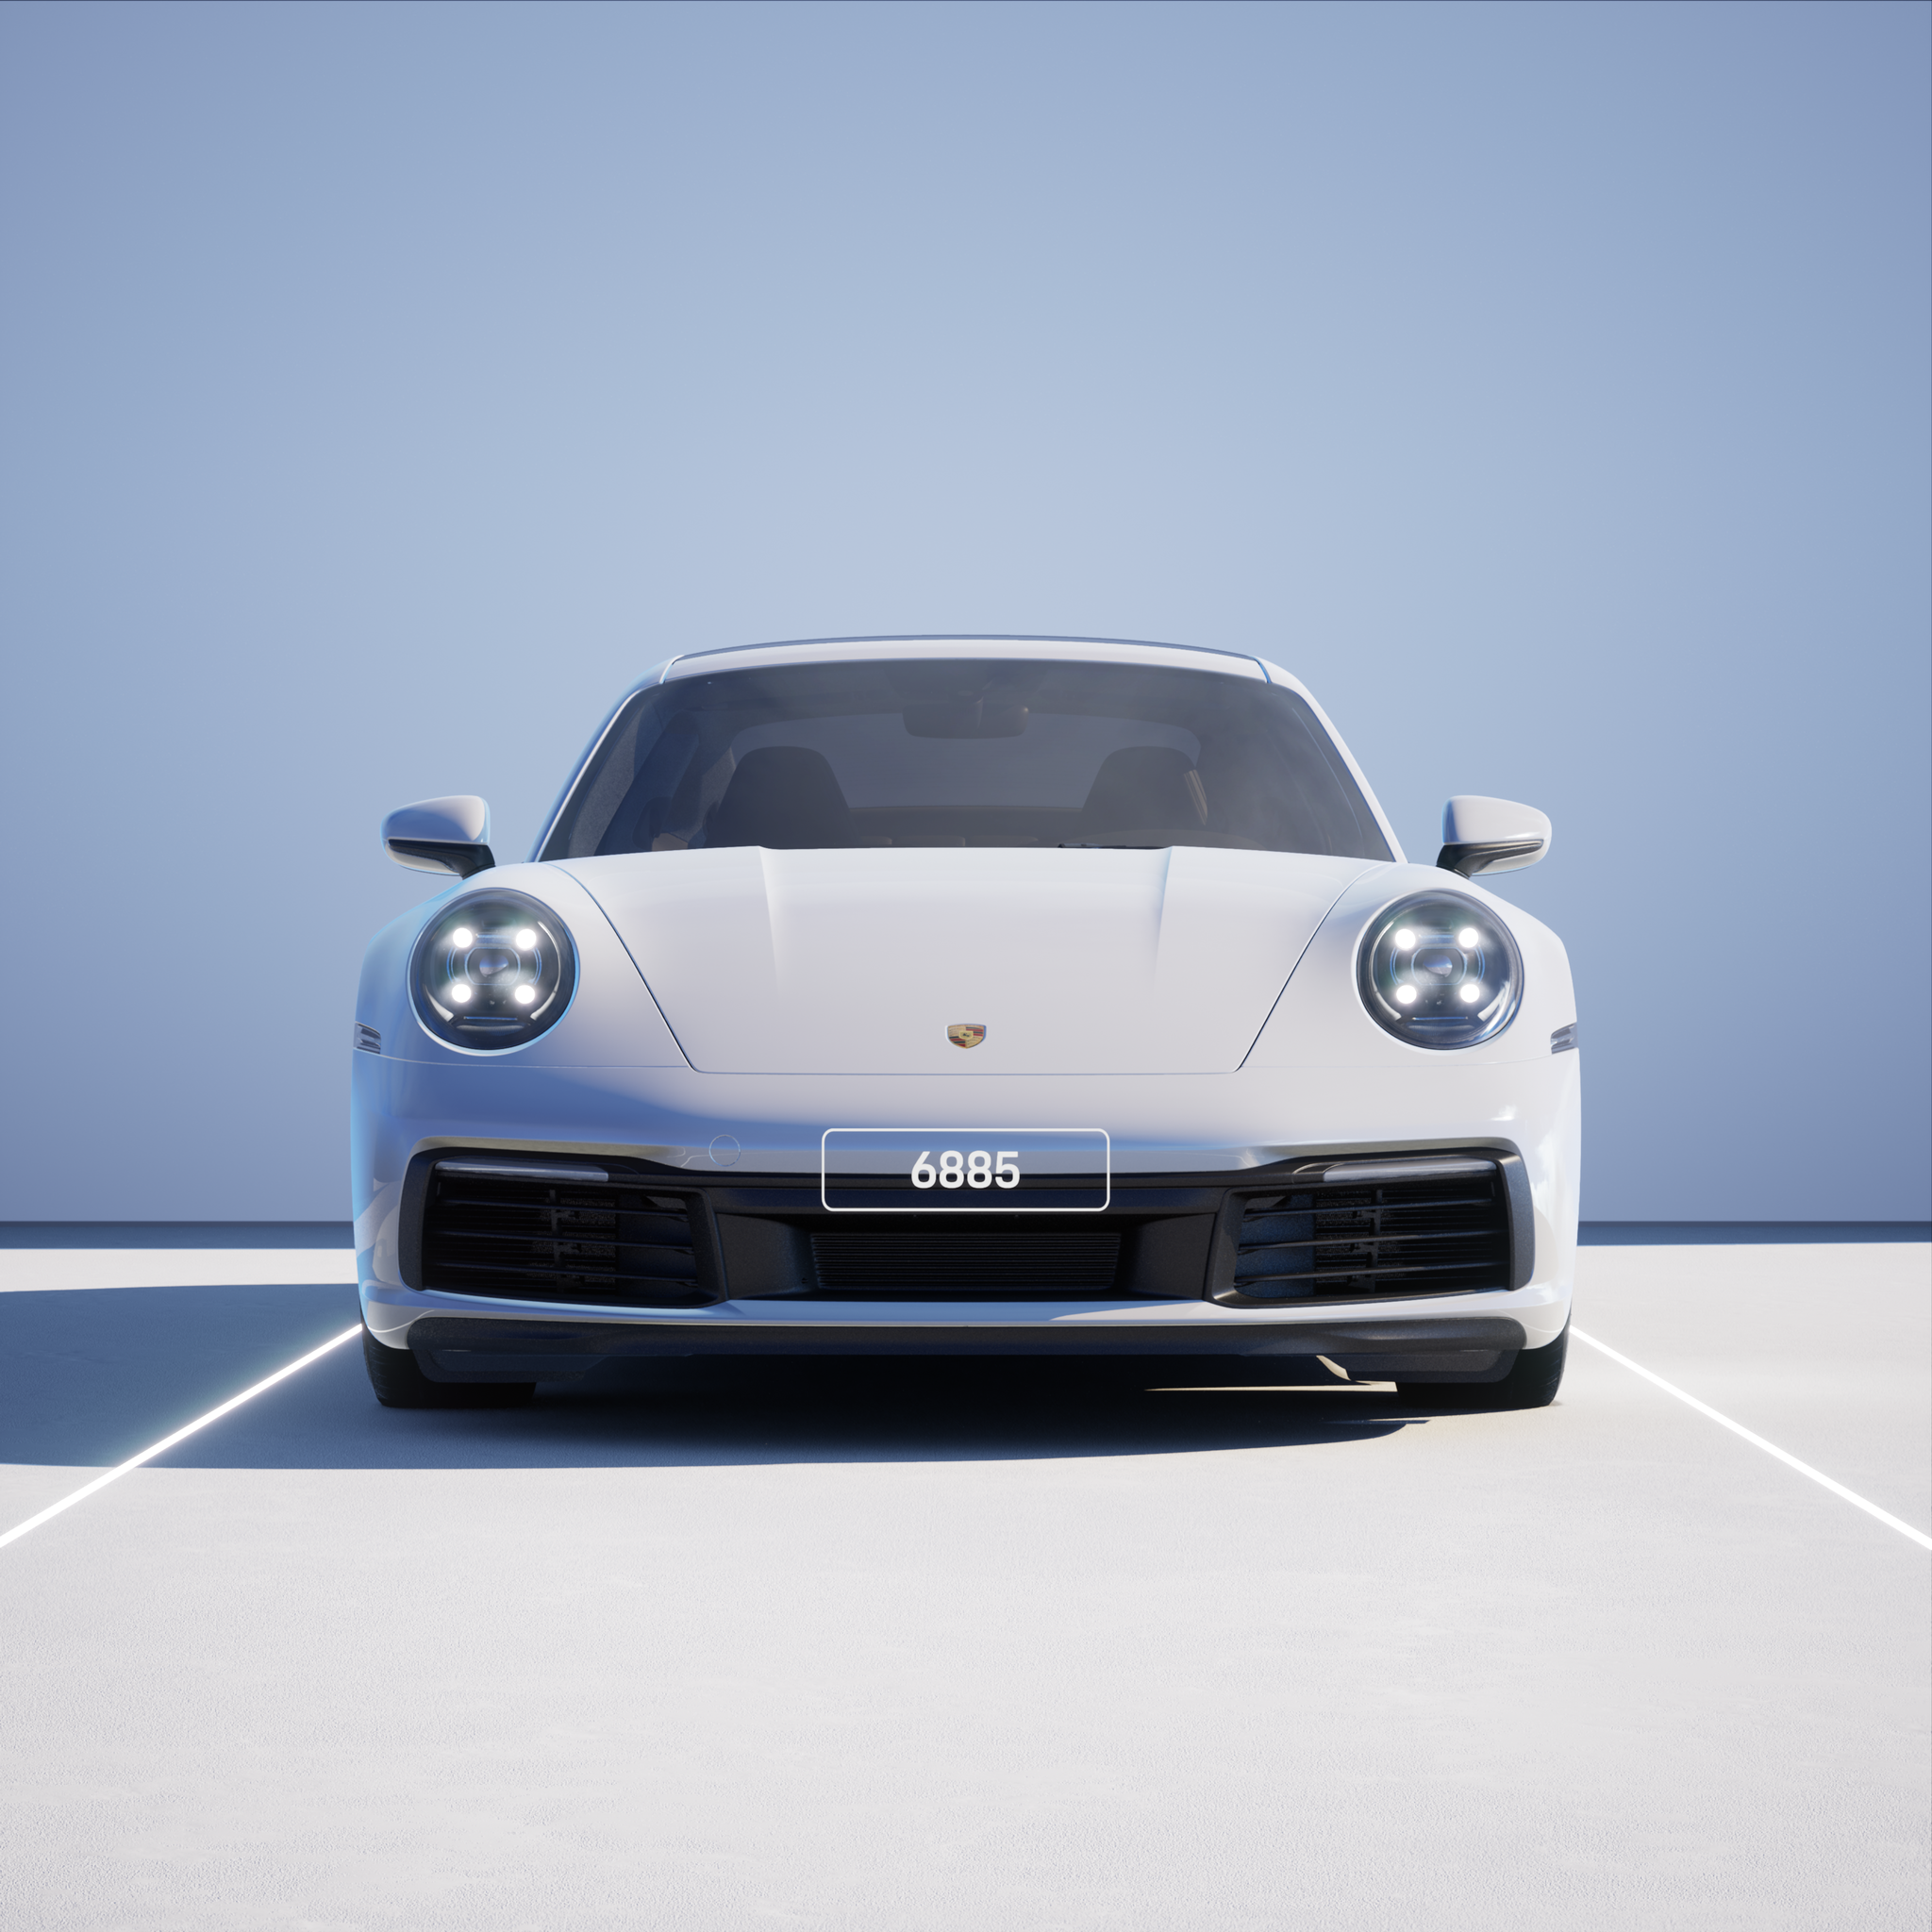 The PORSCHΞ 911 6885 image in phase